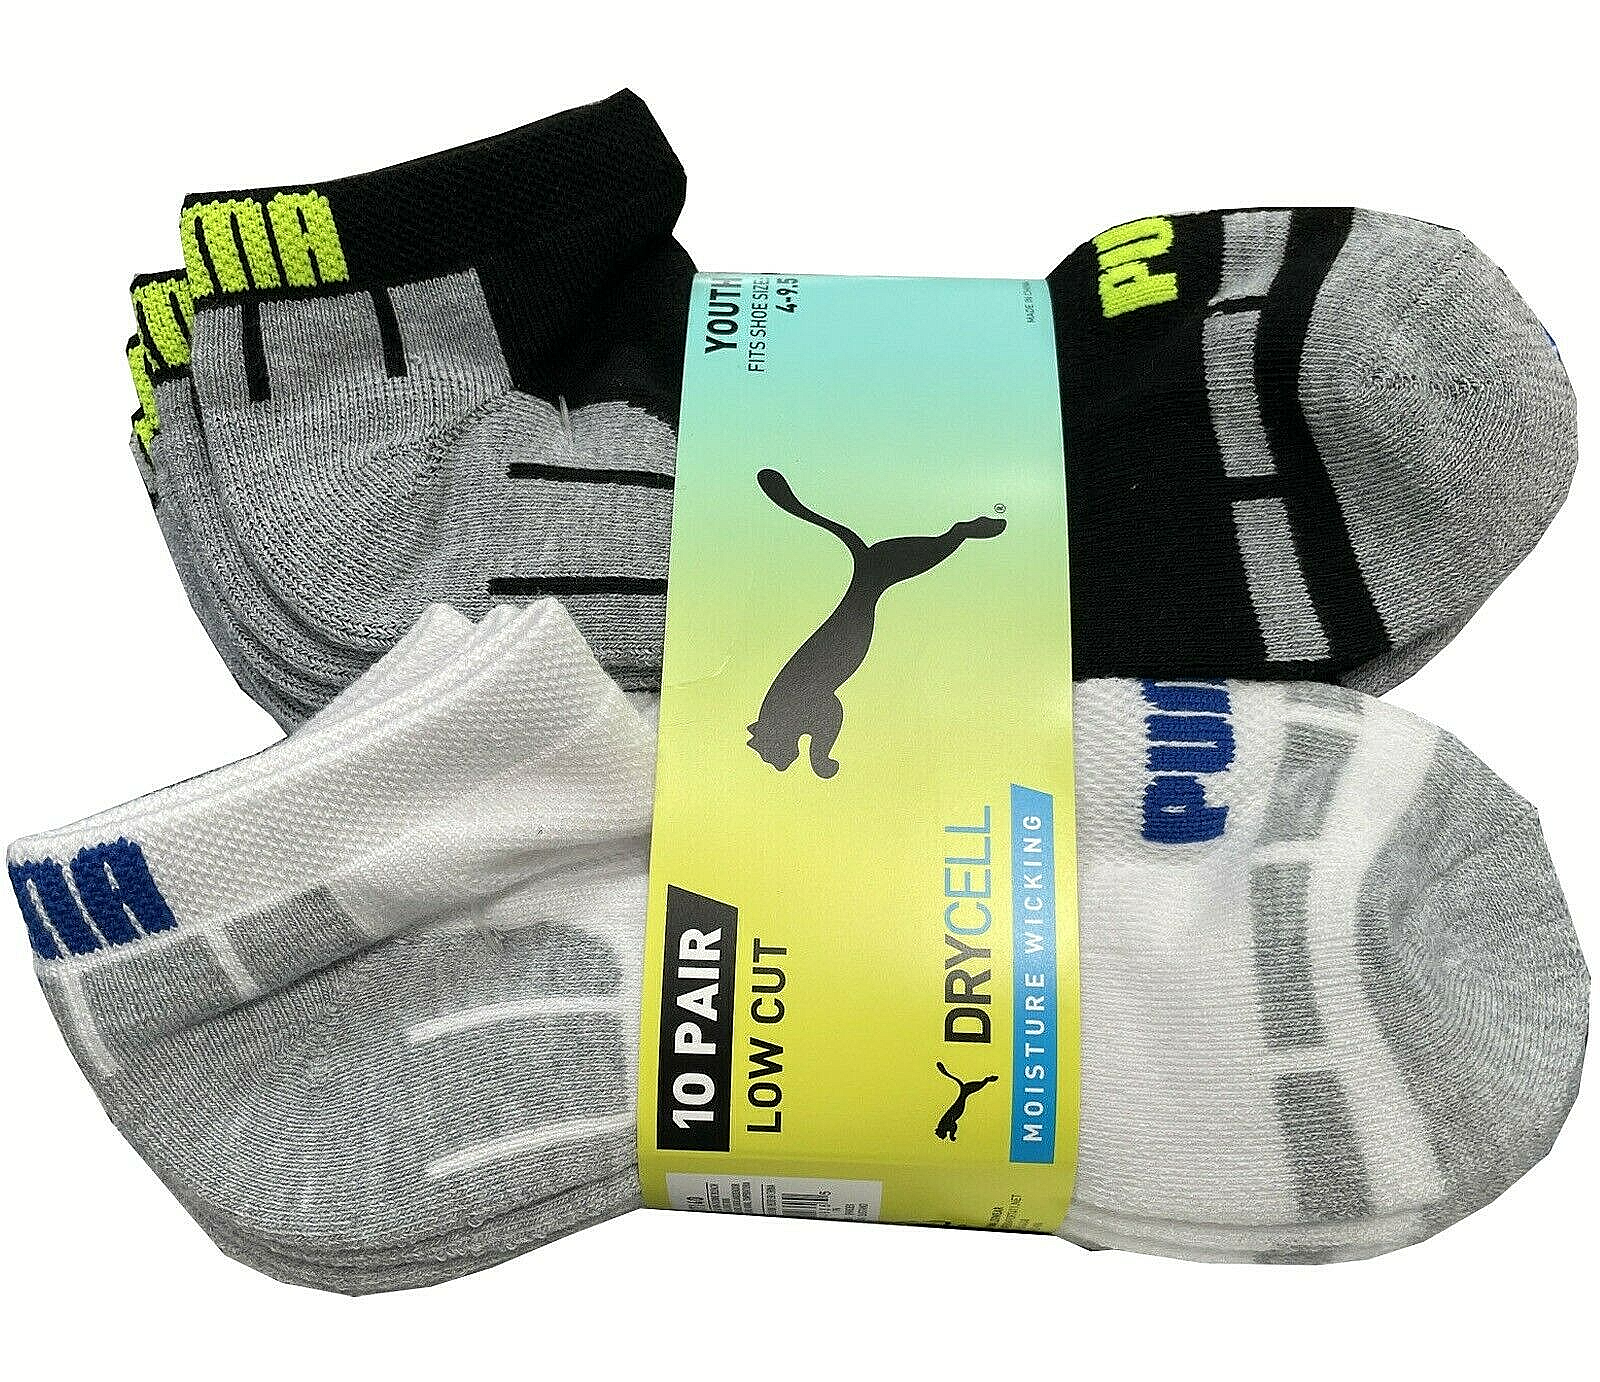 Puma 10 pair low cut moisture wicking arch support socks for girls Kids/Youth - $18.05